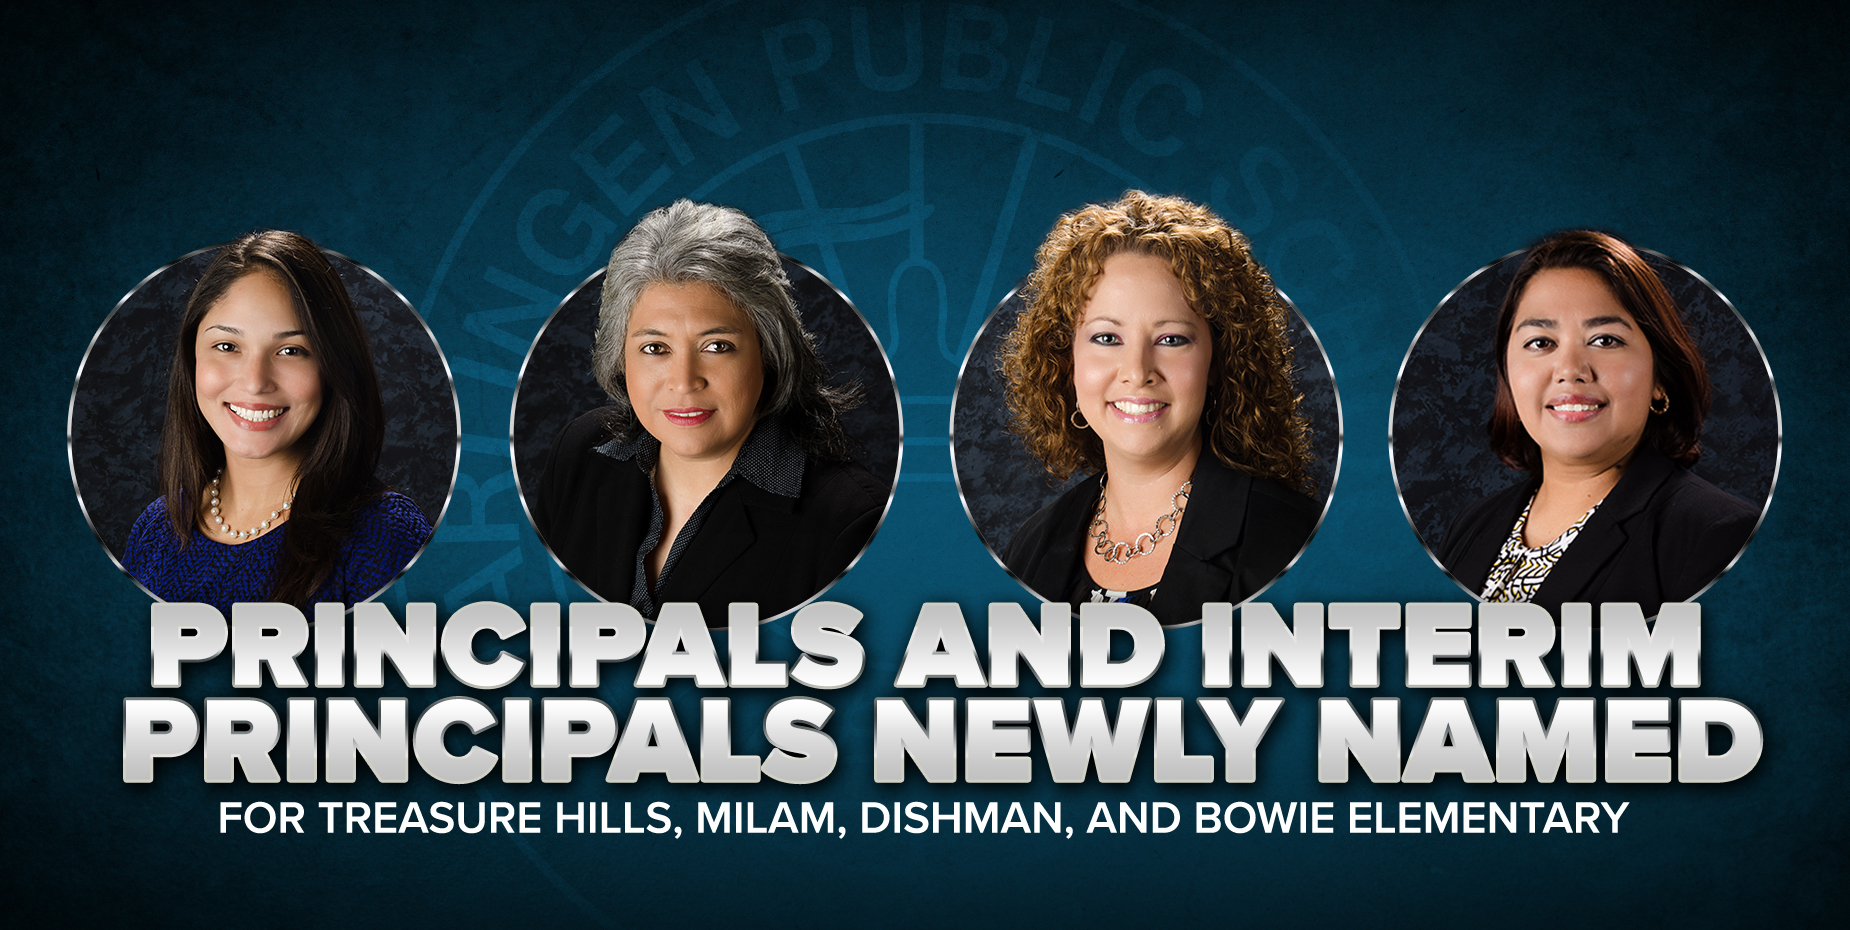 Principals and Interim Principals newly named for Treasure Hills, Milam, Dishman, and Bowie Elementary